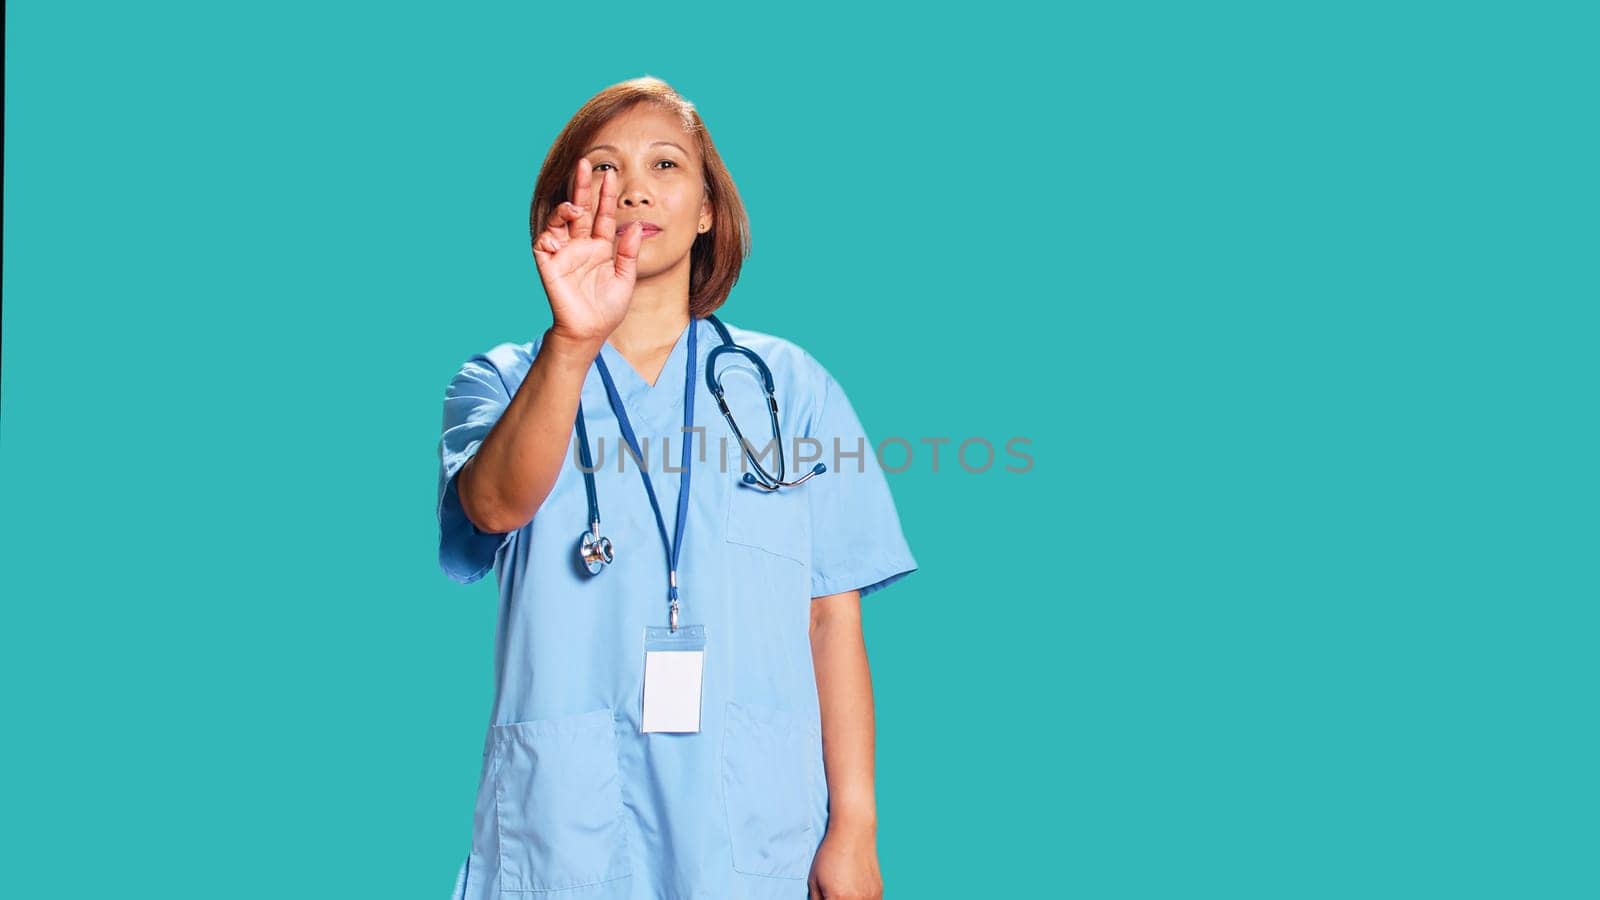 Nurse doing swiping hand motions, remotely controlling tactile screen. Healthcare specialist working in high-tech futuristic modern medical clinic, isolated over blue studio background